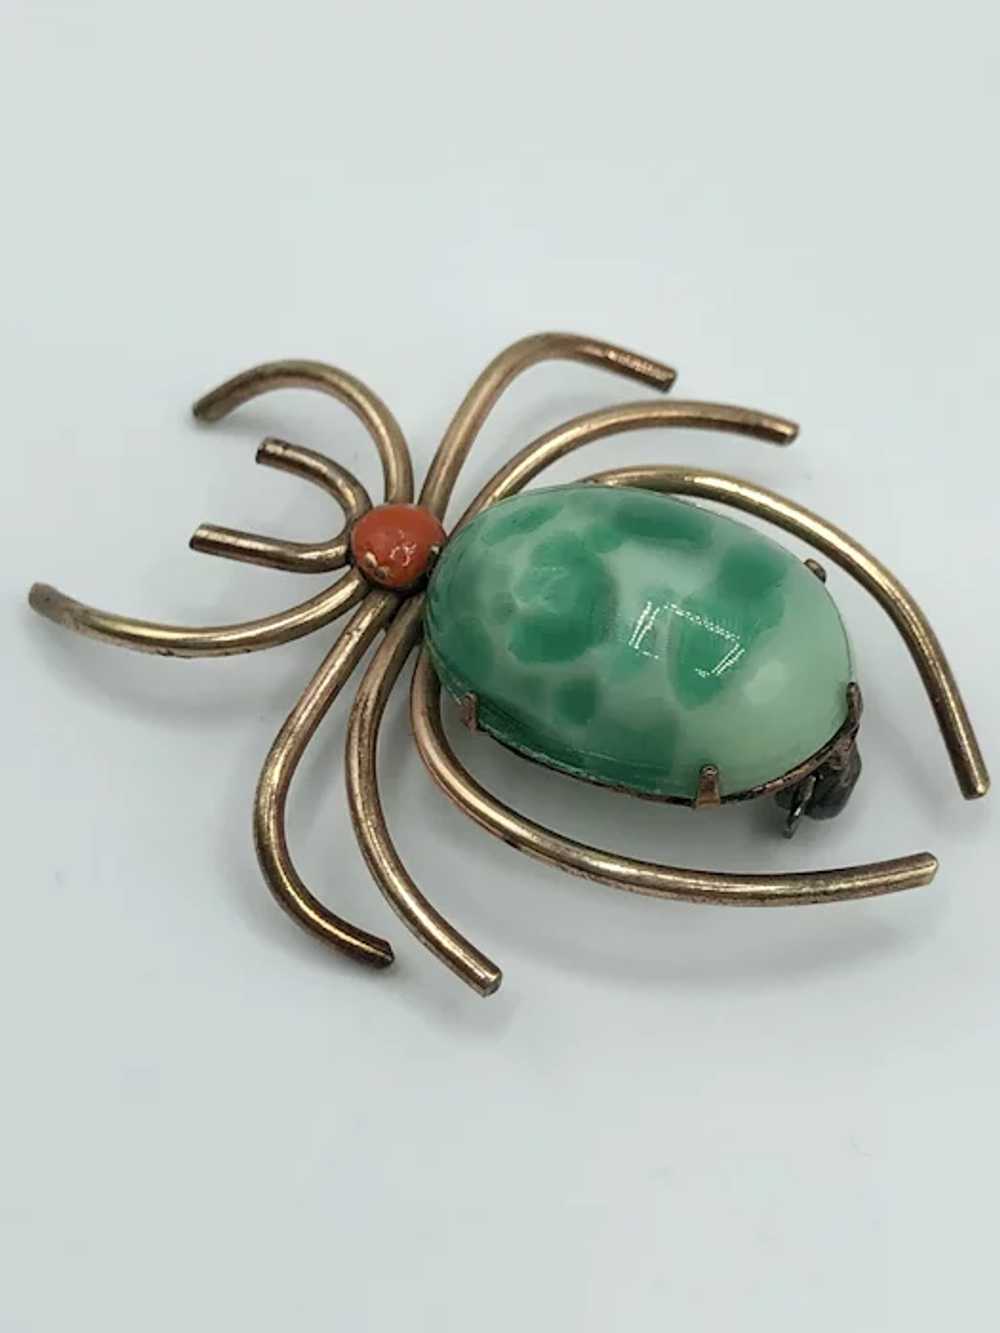 10k Gold Filled White Co Spider Brooch Pin - image 2